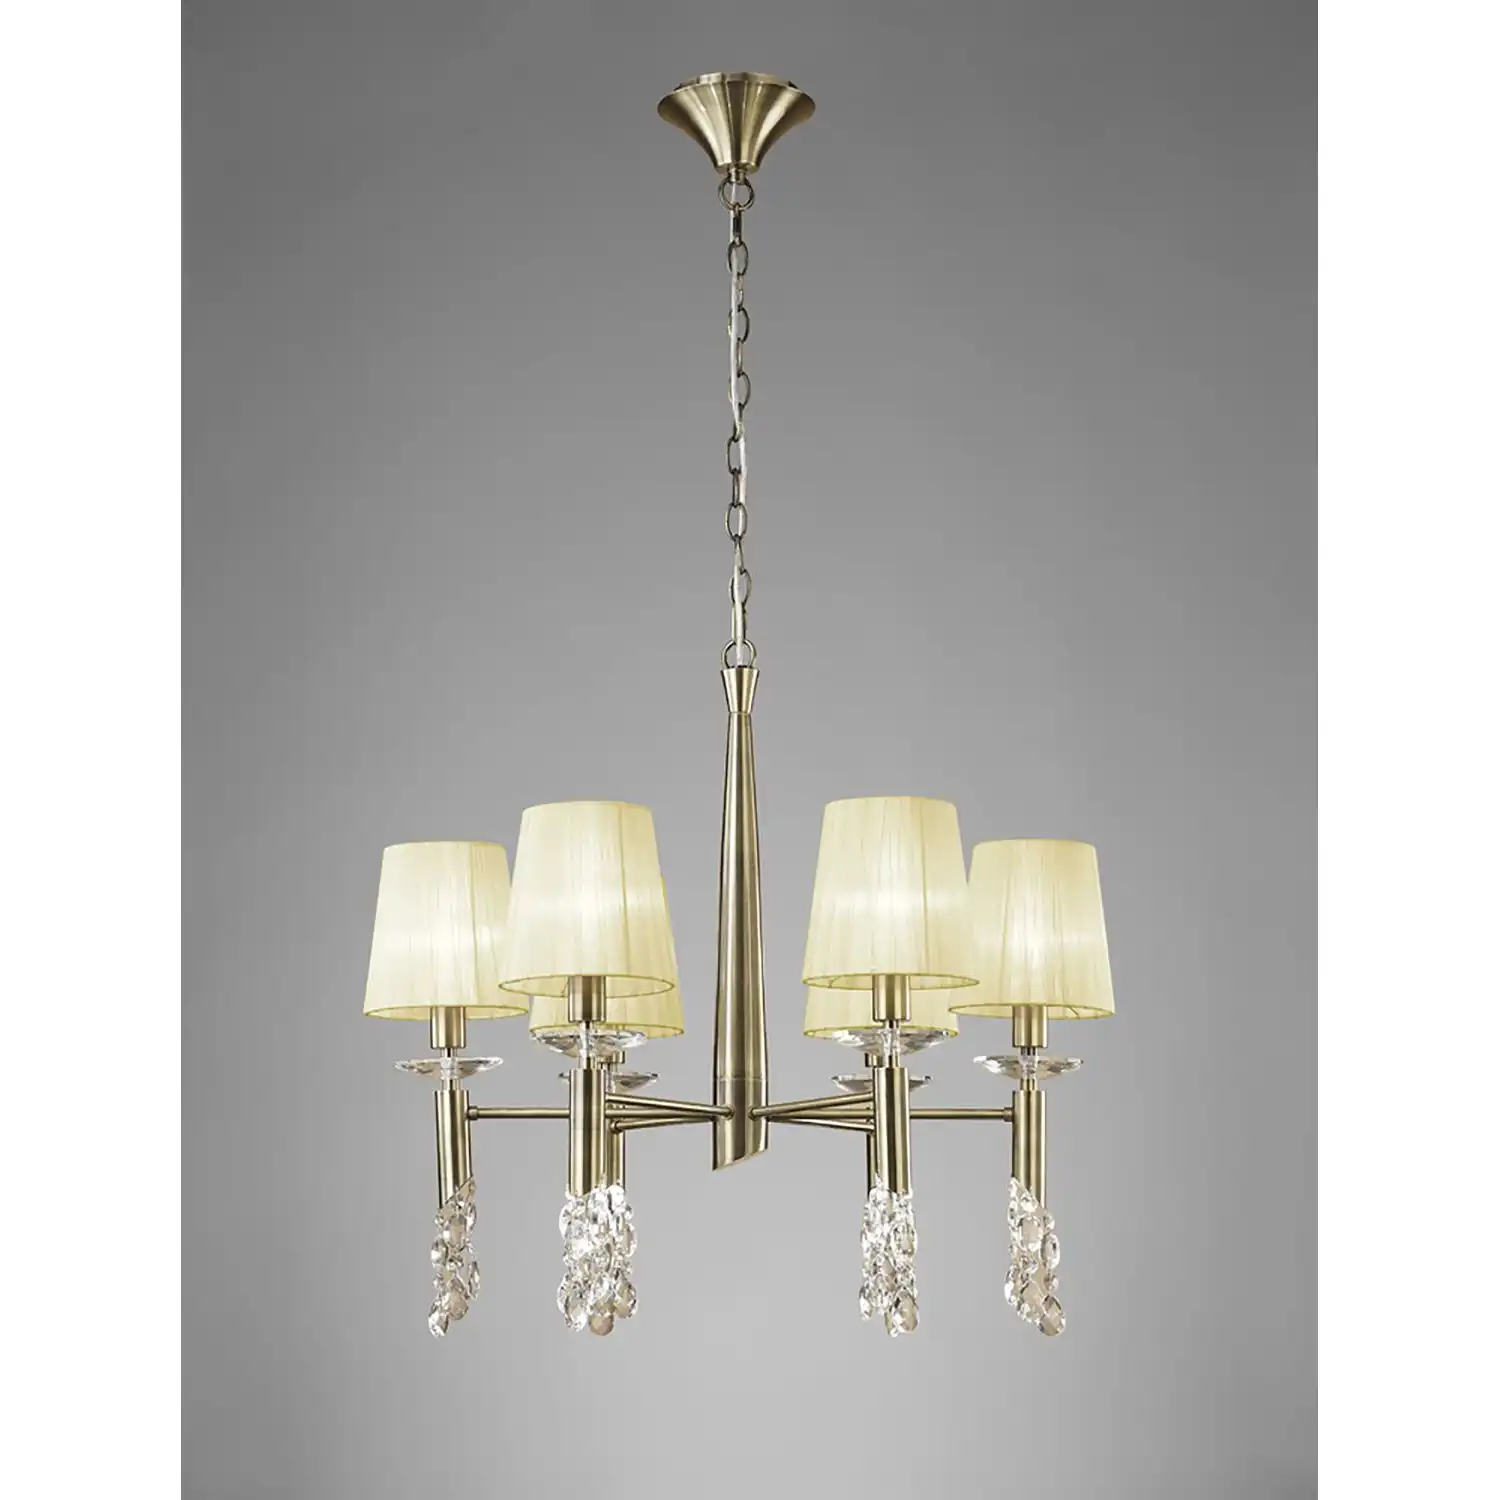 Tiffany Pendant 6+6 Light E14+G9, Antique Brass With Cream Shades And Clear Crystal